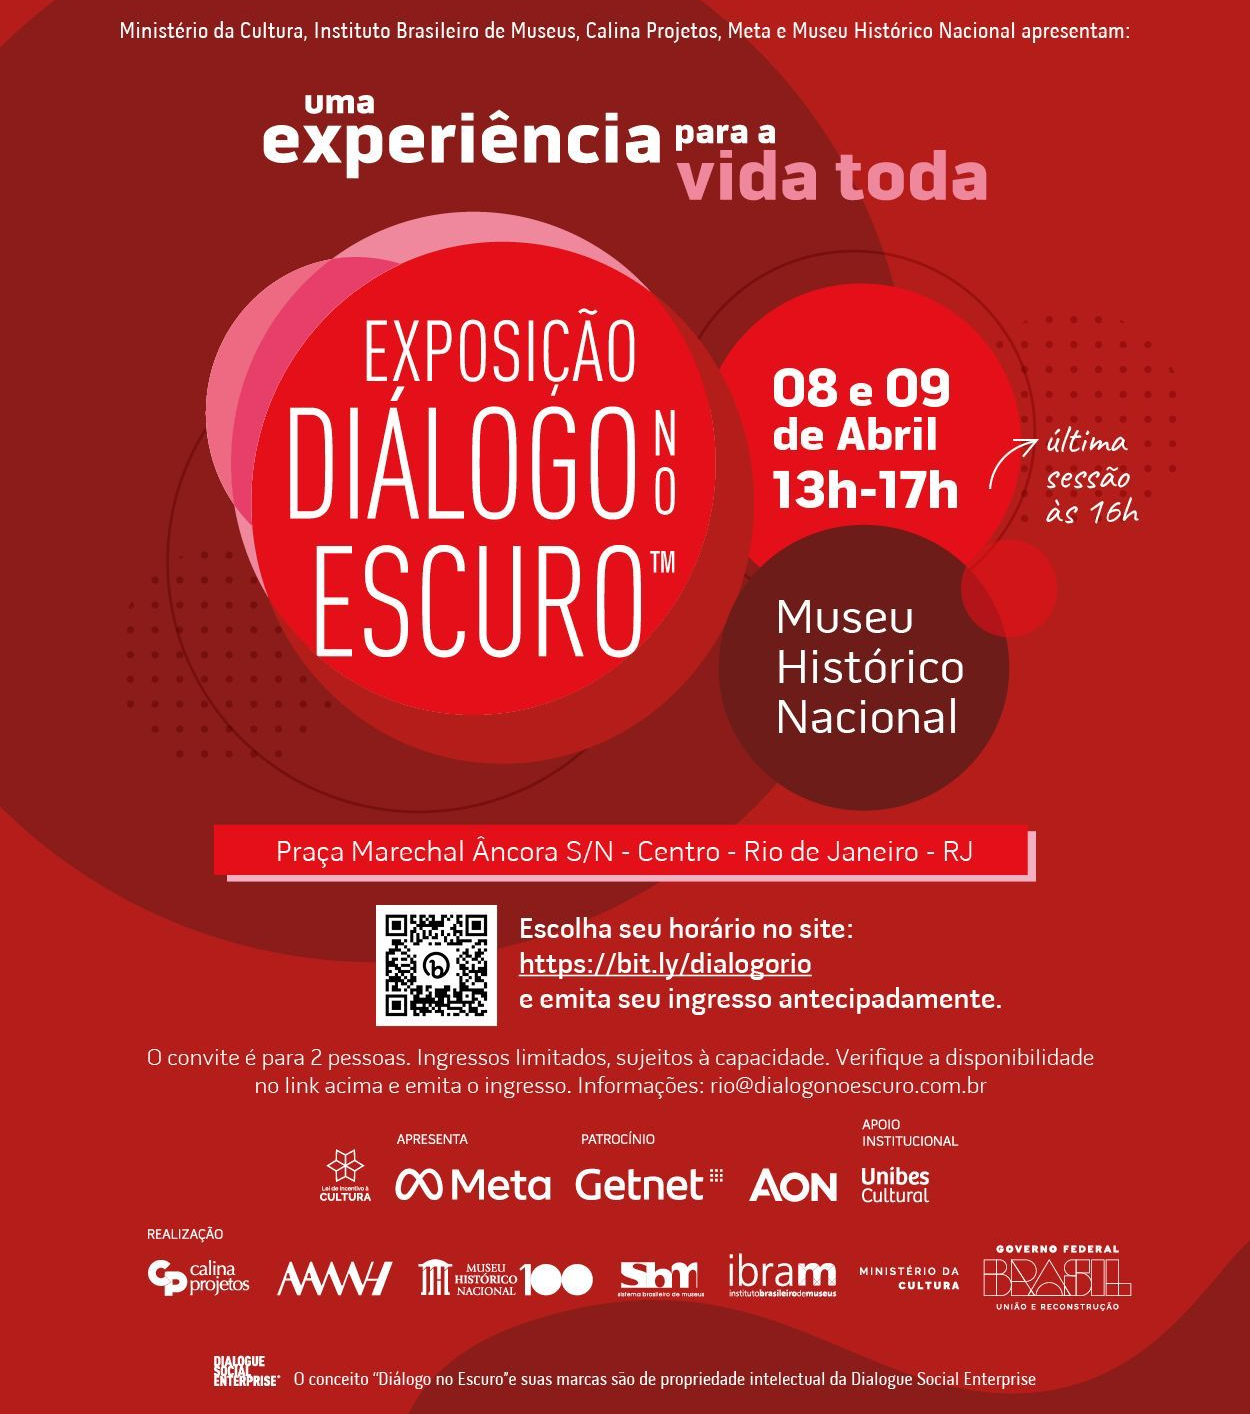 Poster of the new Dialogue in the Dark exhibition in Rio